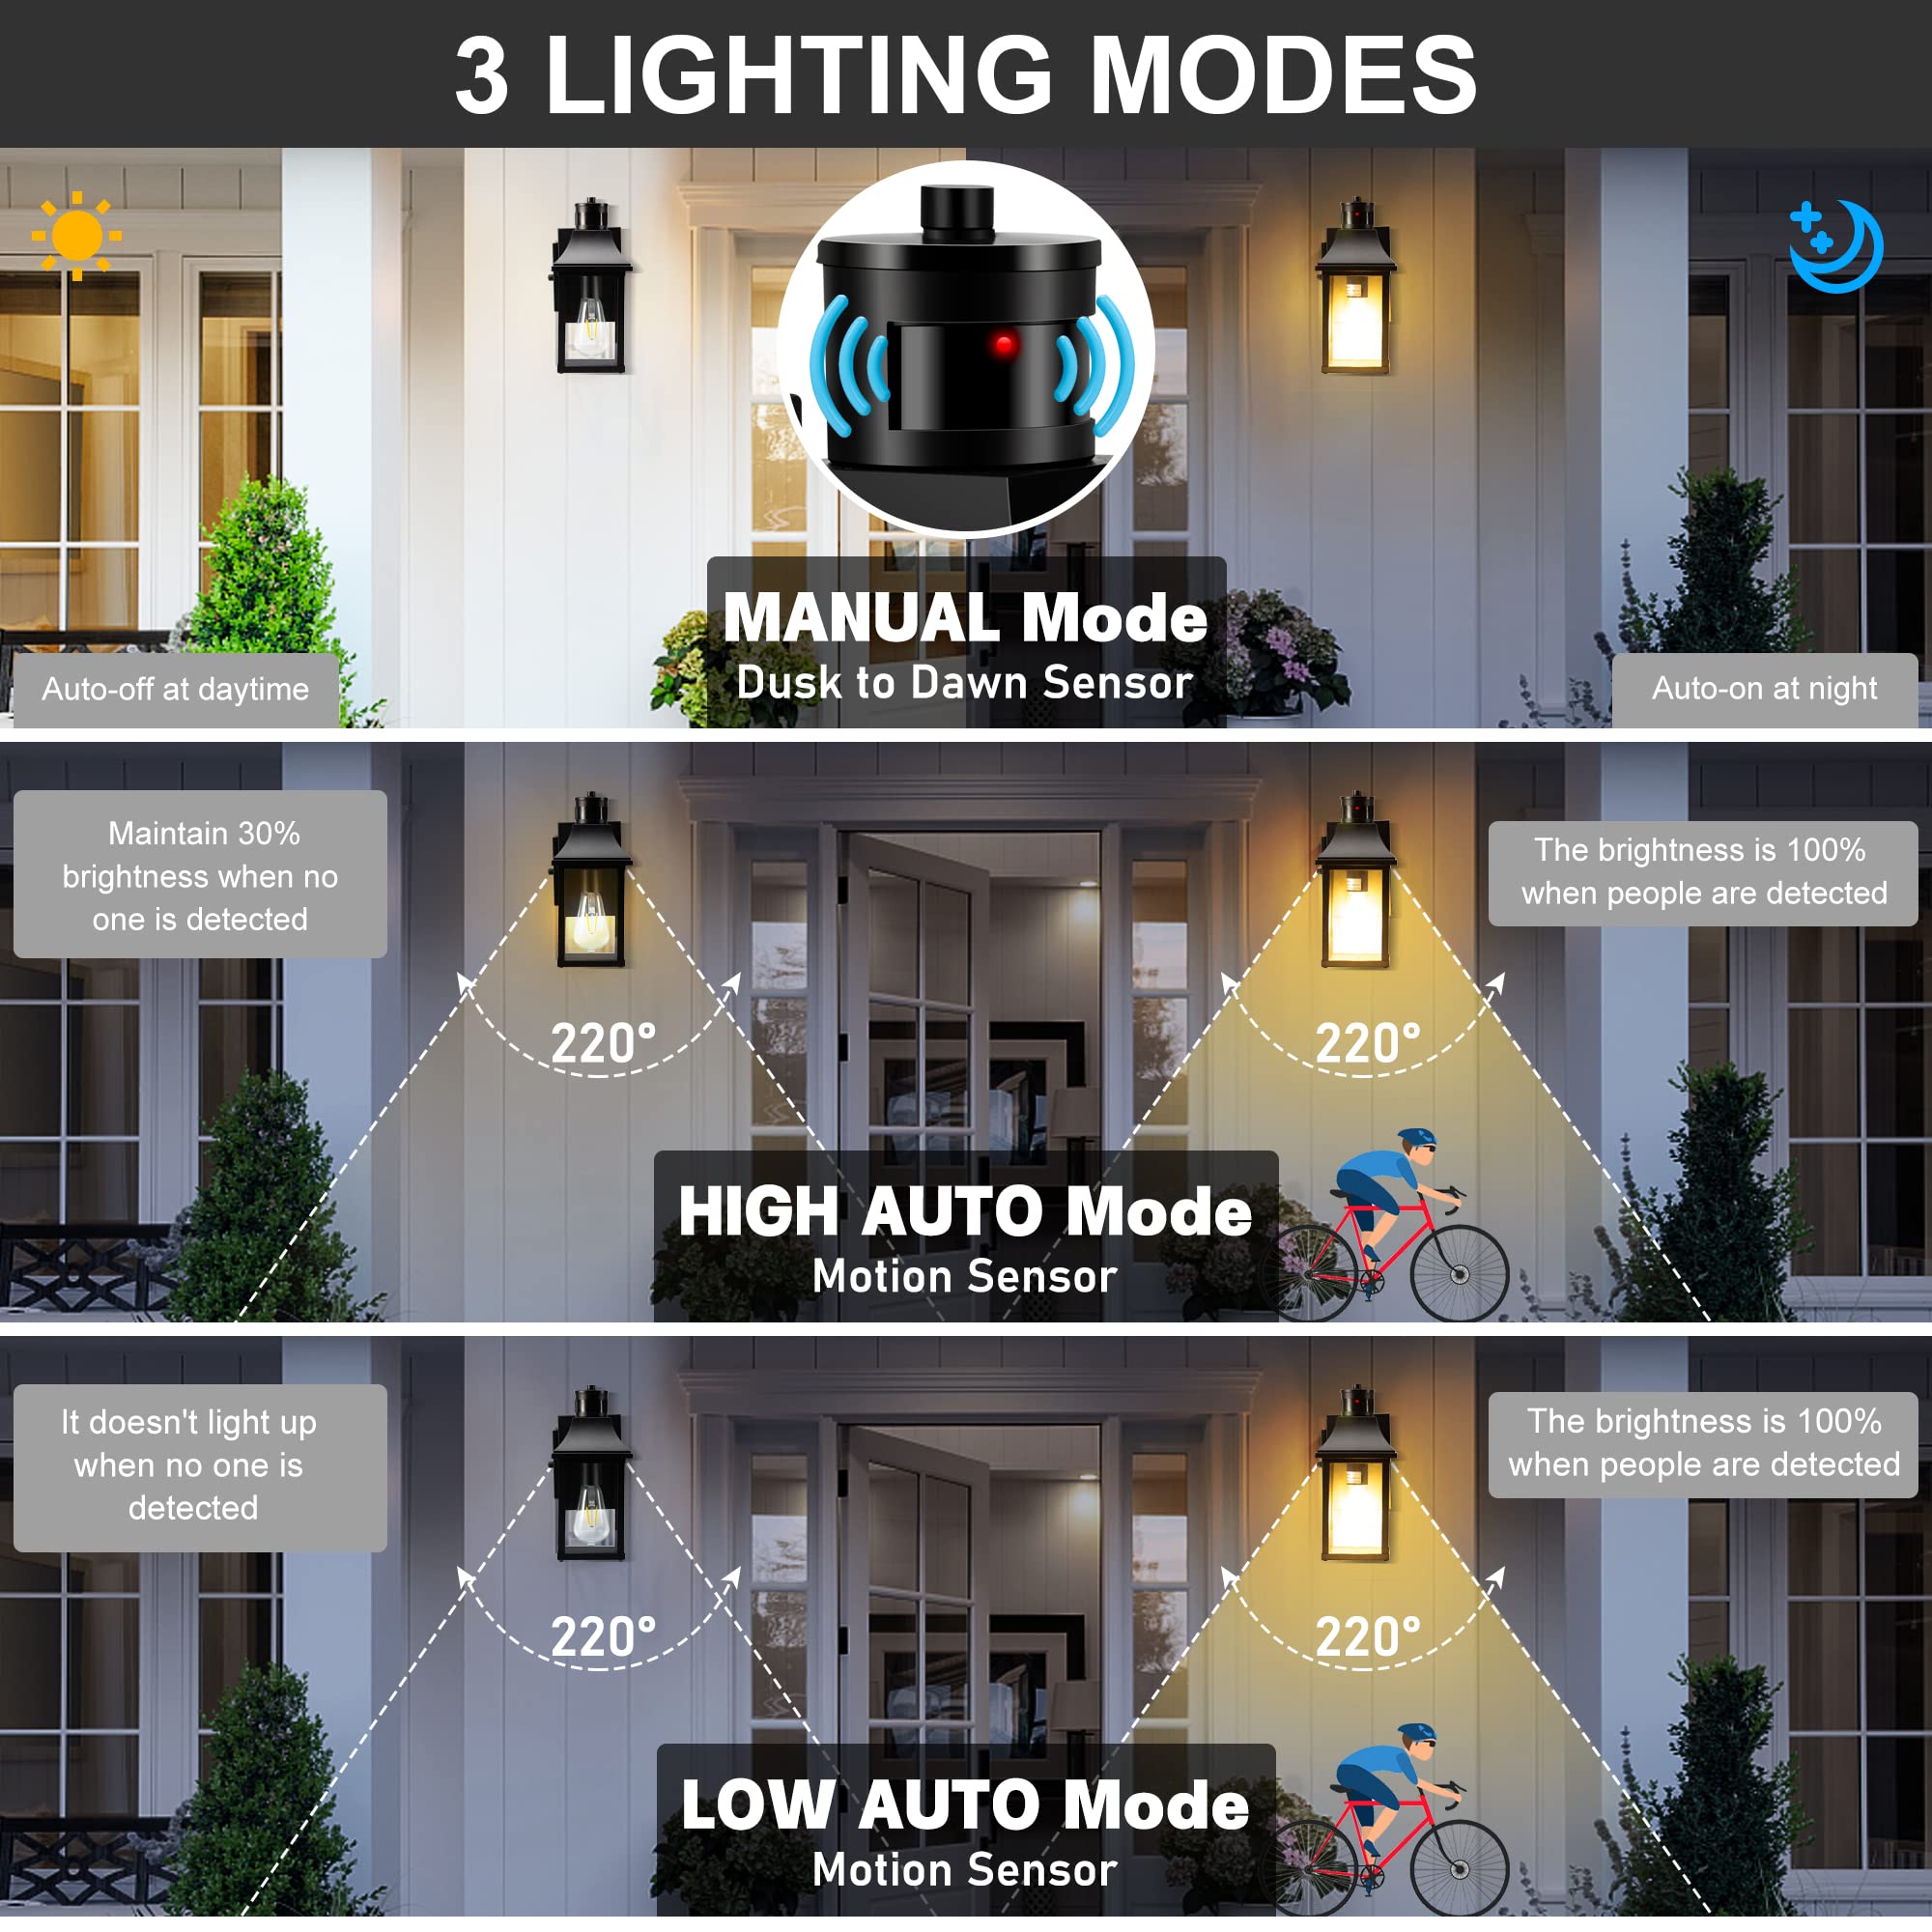 White Outdoor Porch Lights with GFCI Outlet,Dusk to Dawn Outdoor Lighting Work with Security Camera,Aluminum Exterior Outdoor Wall Lights Fixture,Wate - 2